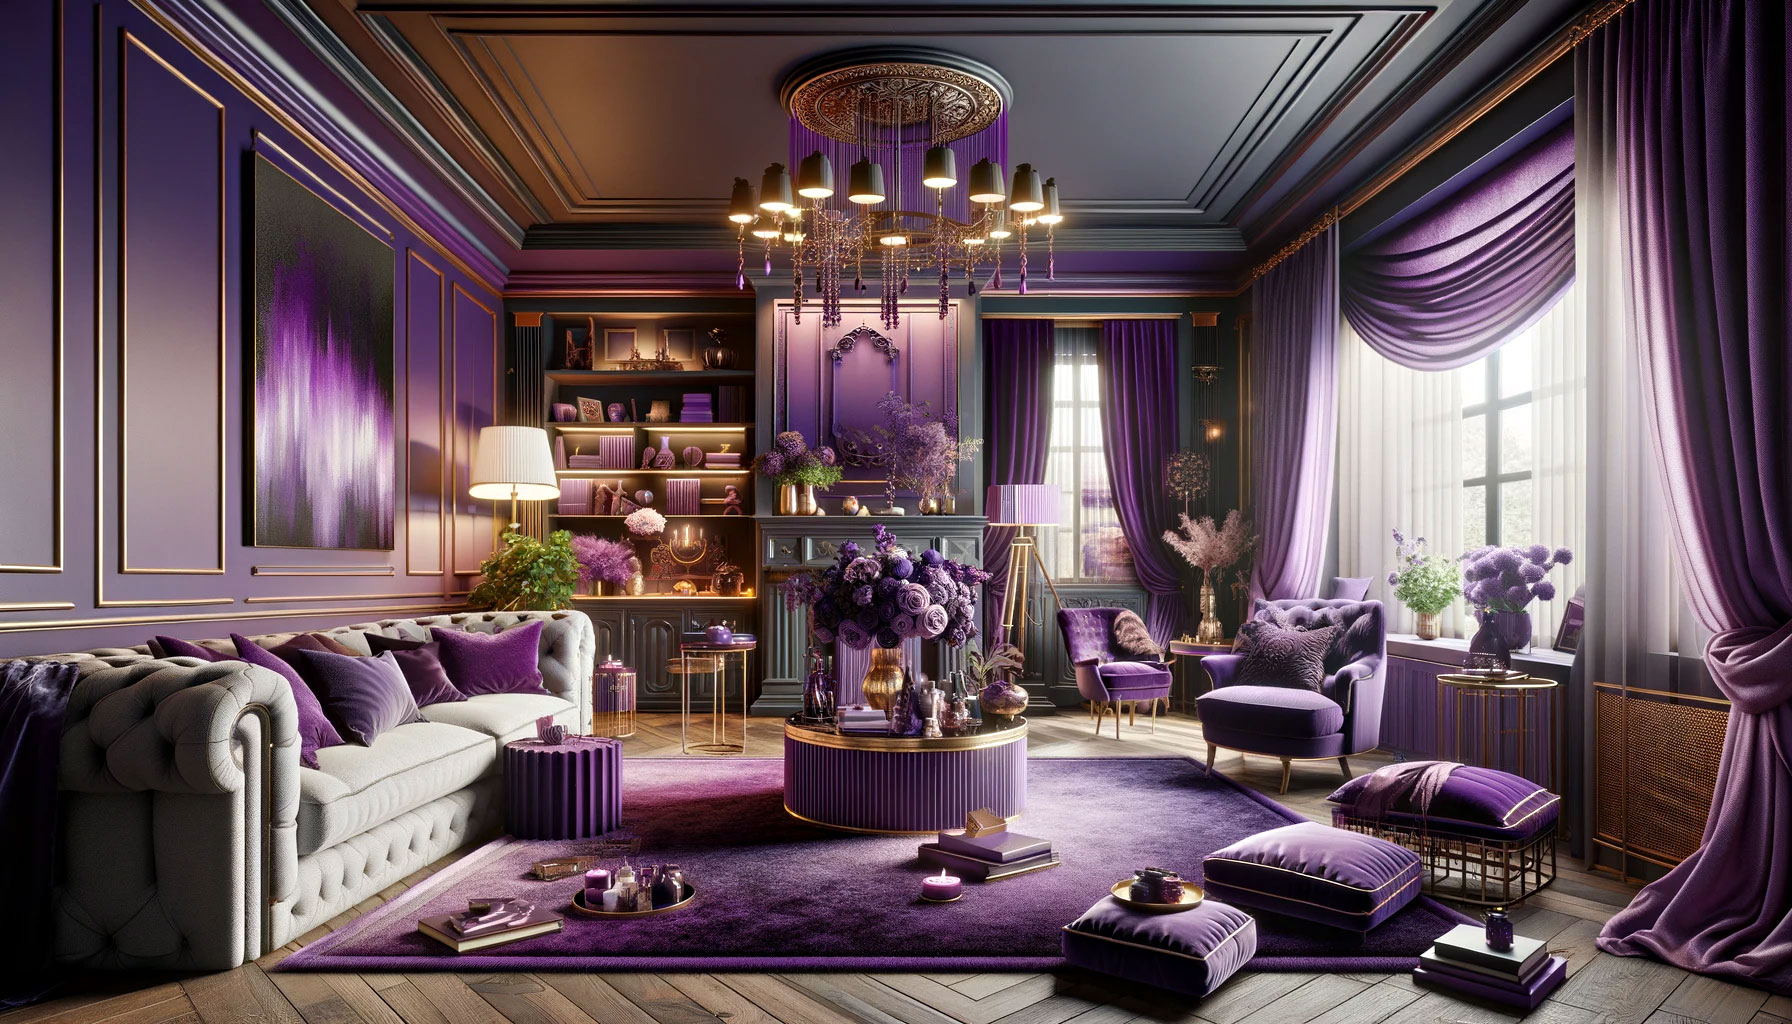 The Colour Psychology of Purple in Interior Design